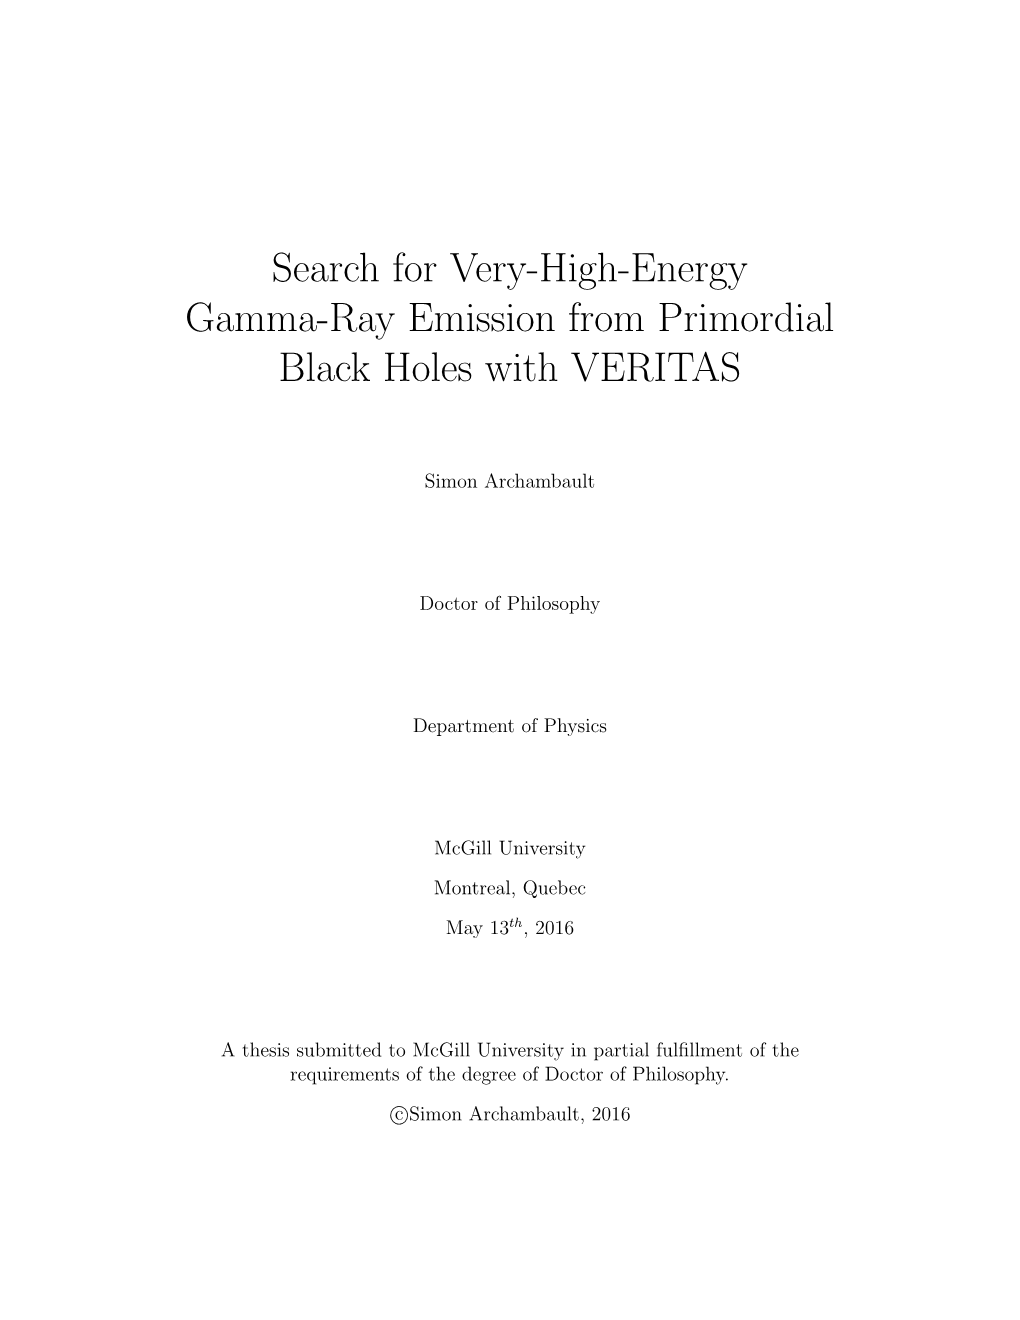 Search for Very-High-Energy Gamma-Ray Emission from Primordial Black Holes with VERITAS